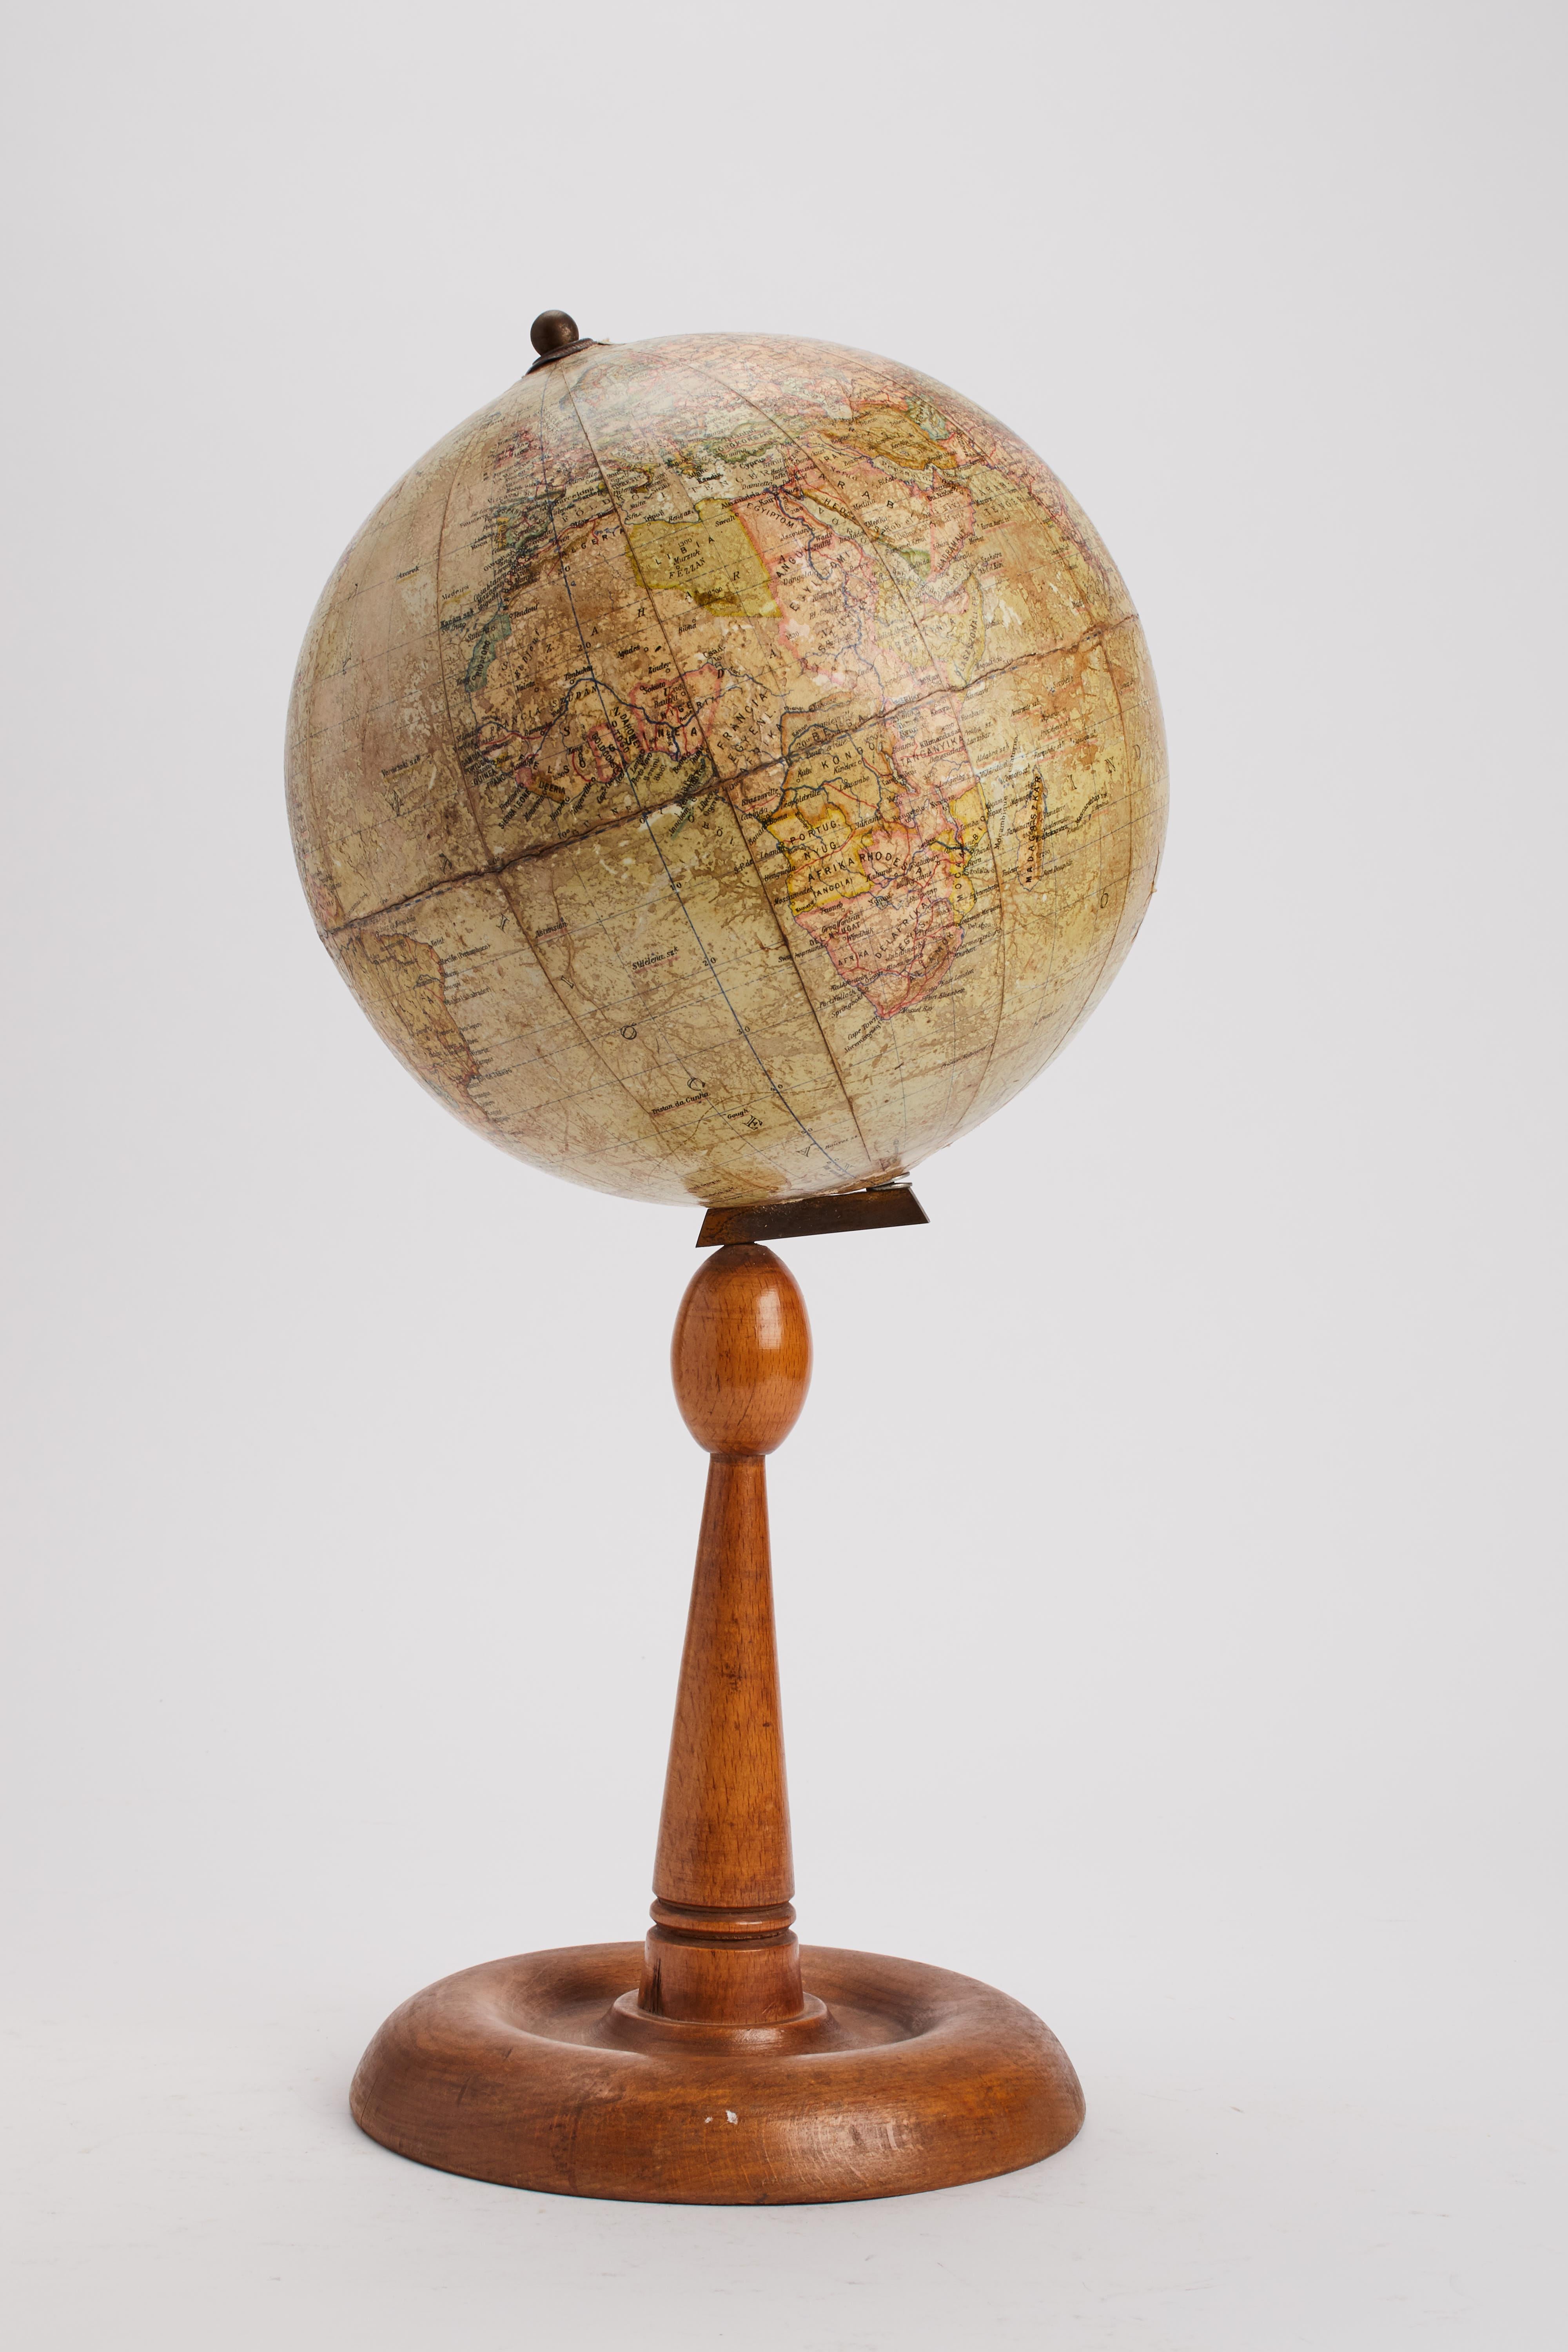 Medium-sized paper mache terrestrial globe on a turned maple wood base. The globe is tilted and connected to the base by a metal stand. Published by Földgömb. Budapest, Hungary circa 1920.